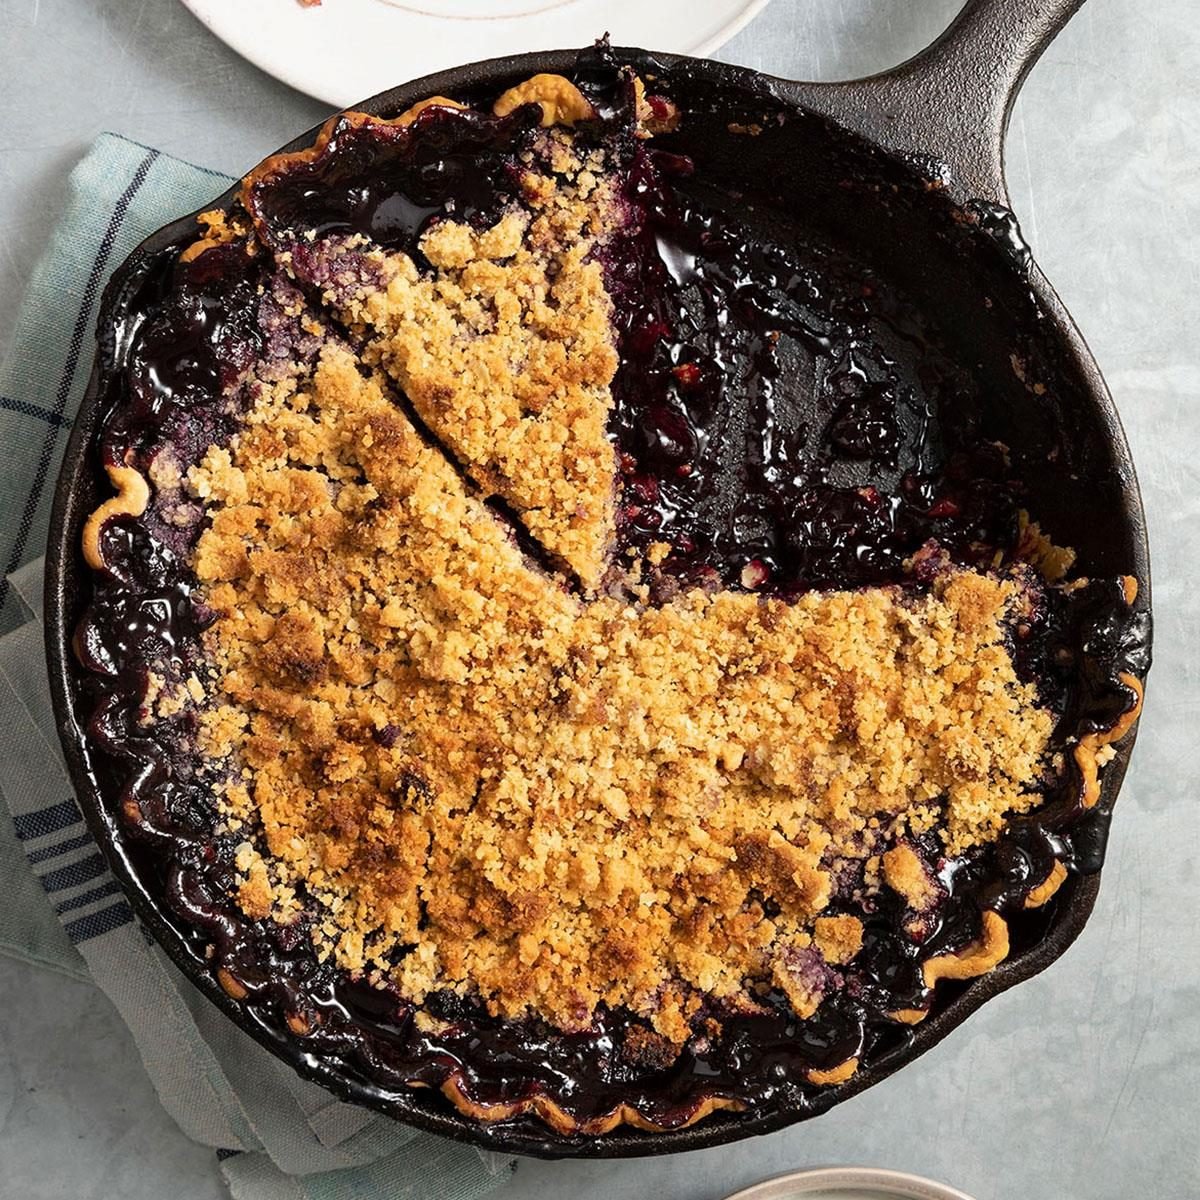 https://www.tasteofhome.com/wp-content/uploads/2018/01/Maine-Blueberry-Pie-with-Crumb-Topping_EXPS_FT23_46683_ST_1129_3.jpg?fit=700%2C1024